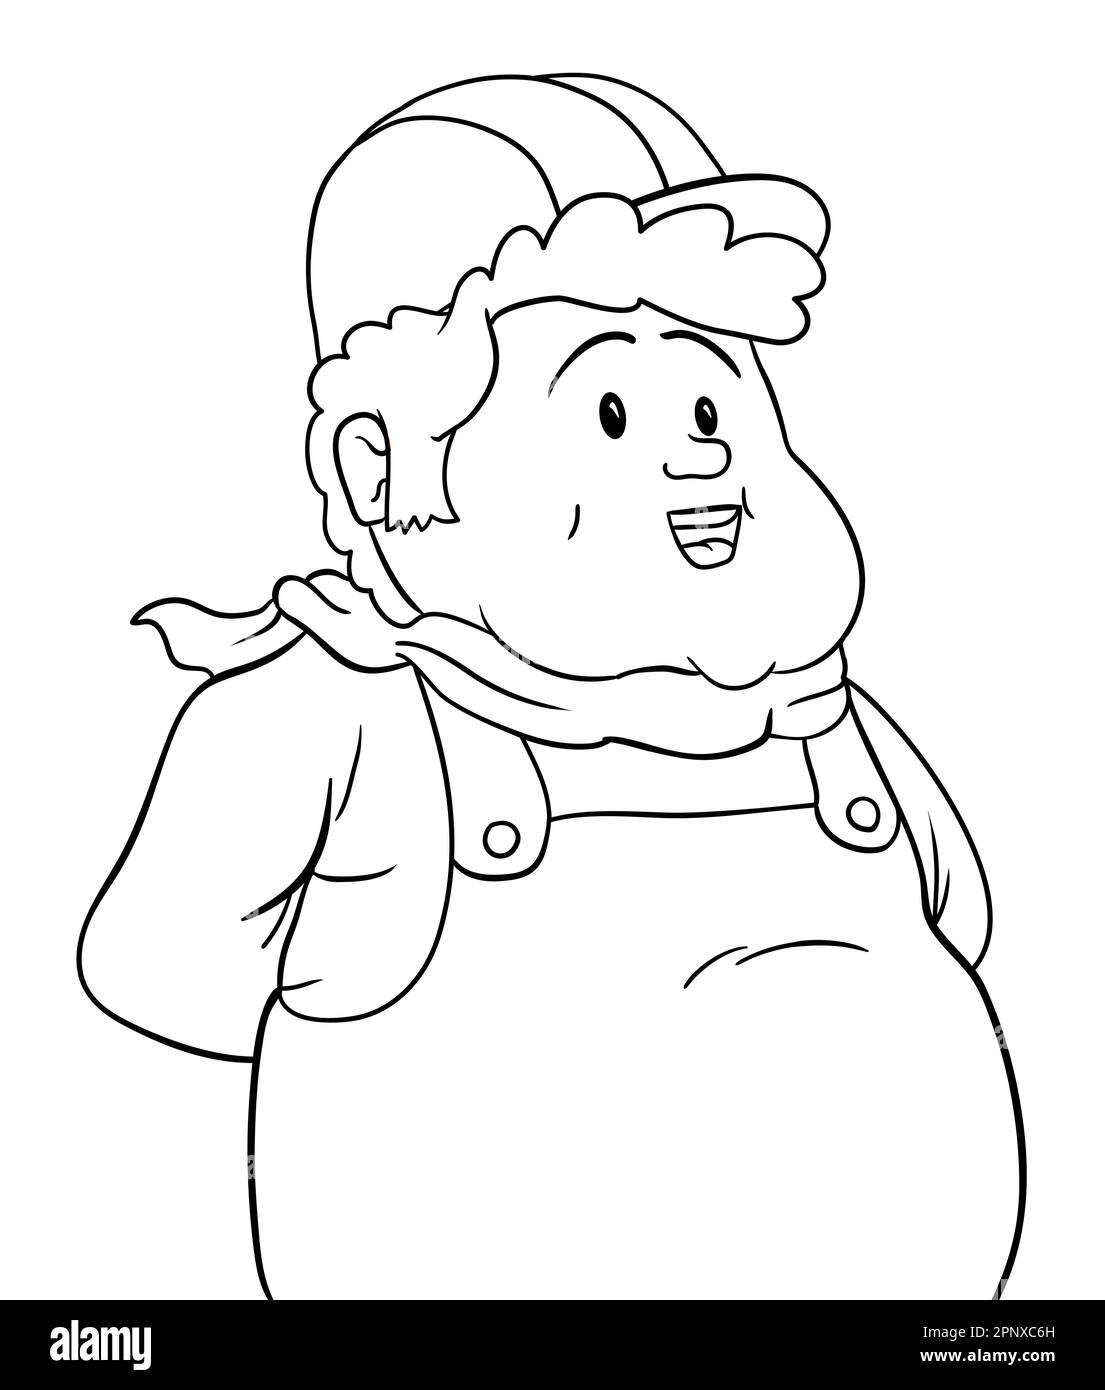 Happy chubby workman with hard hat, neckerchief and bib overalls in outlines for coloring. Stock Vector